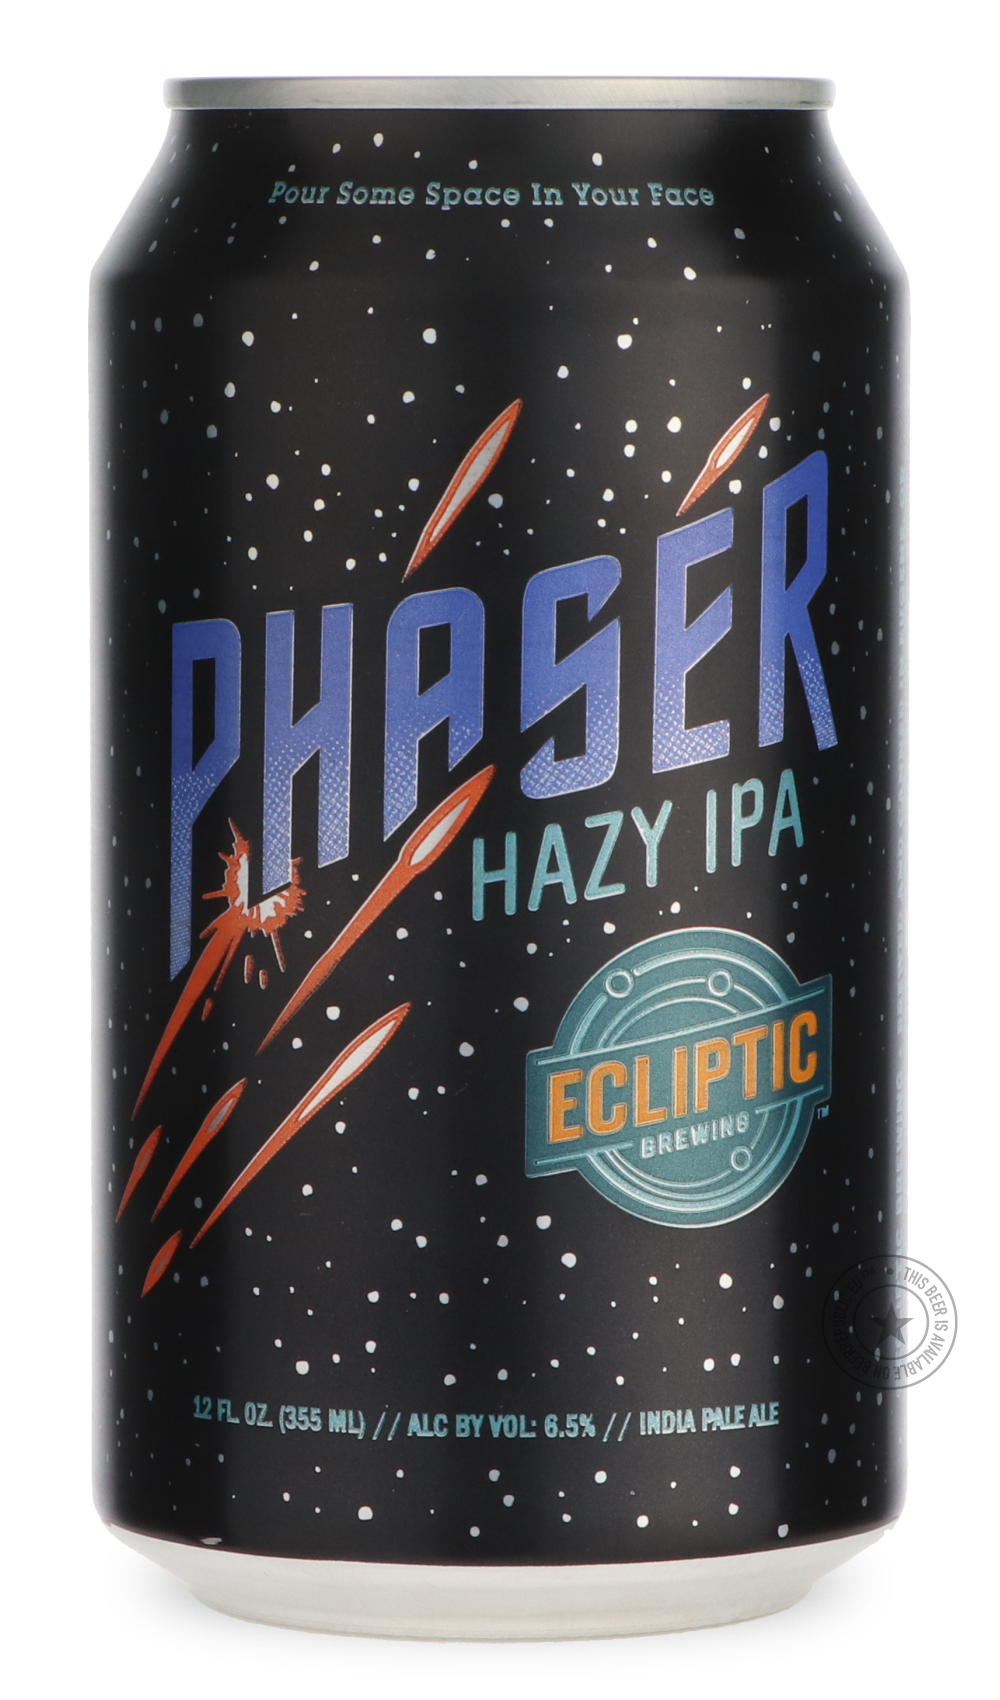 -Ecliptic- Phaser-IPA- Only @ Beer Republic - The best online beer store for American & Canadian craft beer - Buy beer online from the USA and Canada - Bier online kopen - Amerikaans bier kopen - Craft beer store - Craft beer kopen - Amerikanisch bier kaufen - Bier online kaufen - Acheter biere online - IPA - Stout - Porter - New England IPA - Hazy IPA - Imperial Stout - Barrel Aged - Barrel Aged Imperial Stout - Brown - Dark beer - Blond - Blonde - Pilsner - Lager - Wheat - Weizen - Amber - Barley Wine - Q